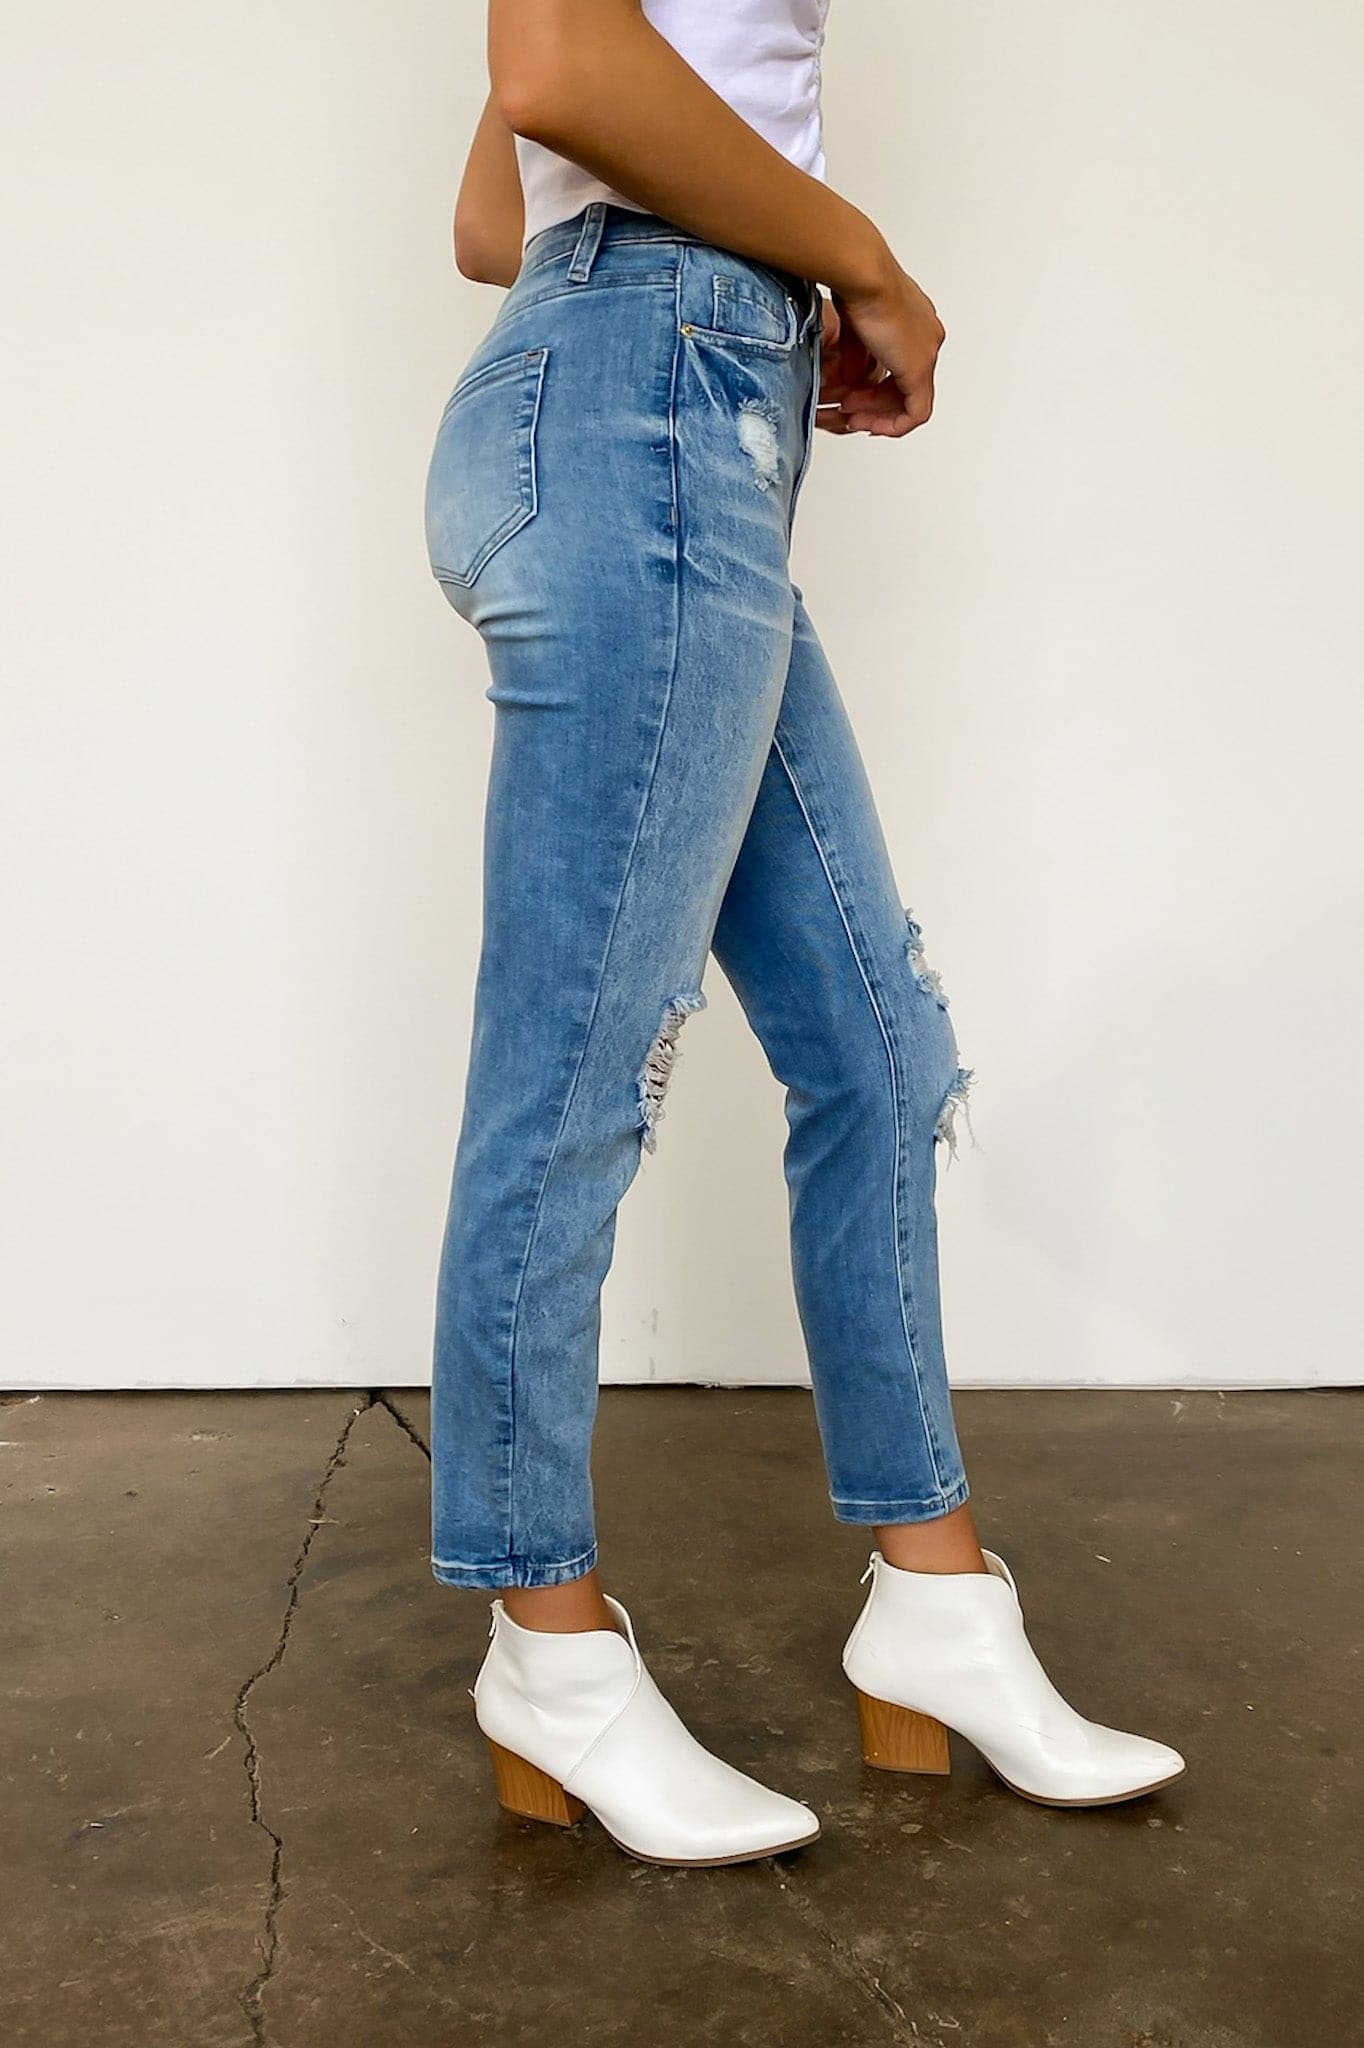  Estiana Dream High Rise Stretch Distressed Mom Jeans - Madison and Mallory